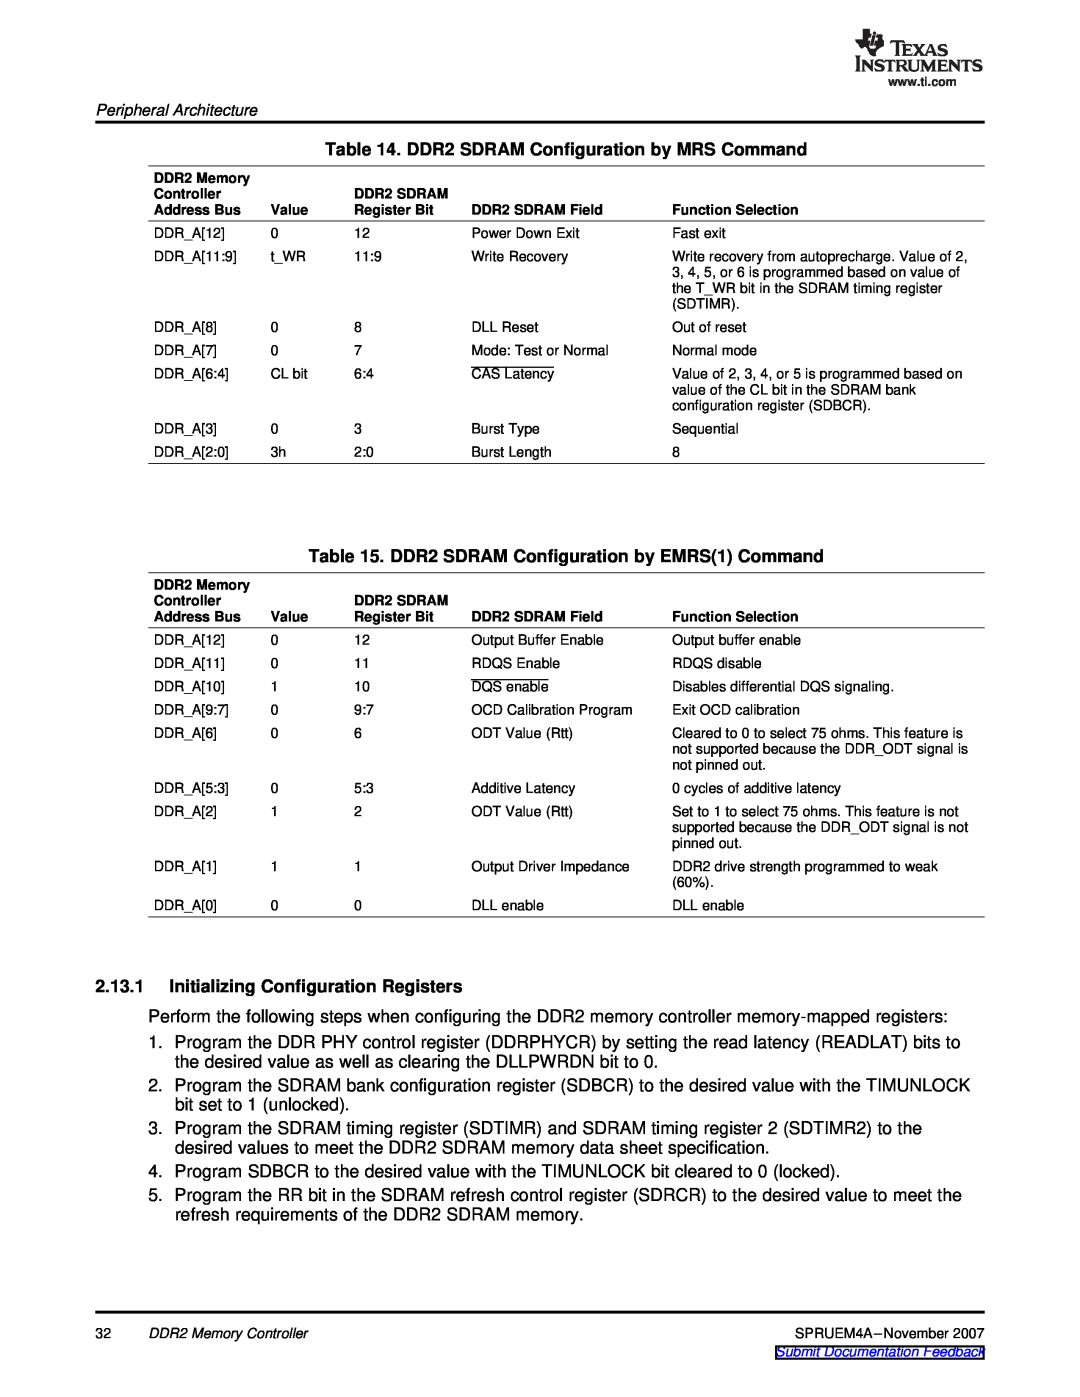 Texas Instruments TMS320C642x DSP manual DDR2 SDRAM Configuration by MRS Command, DDR2 SDRAM Configuration by EMRS1 Command 